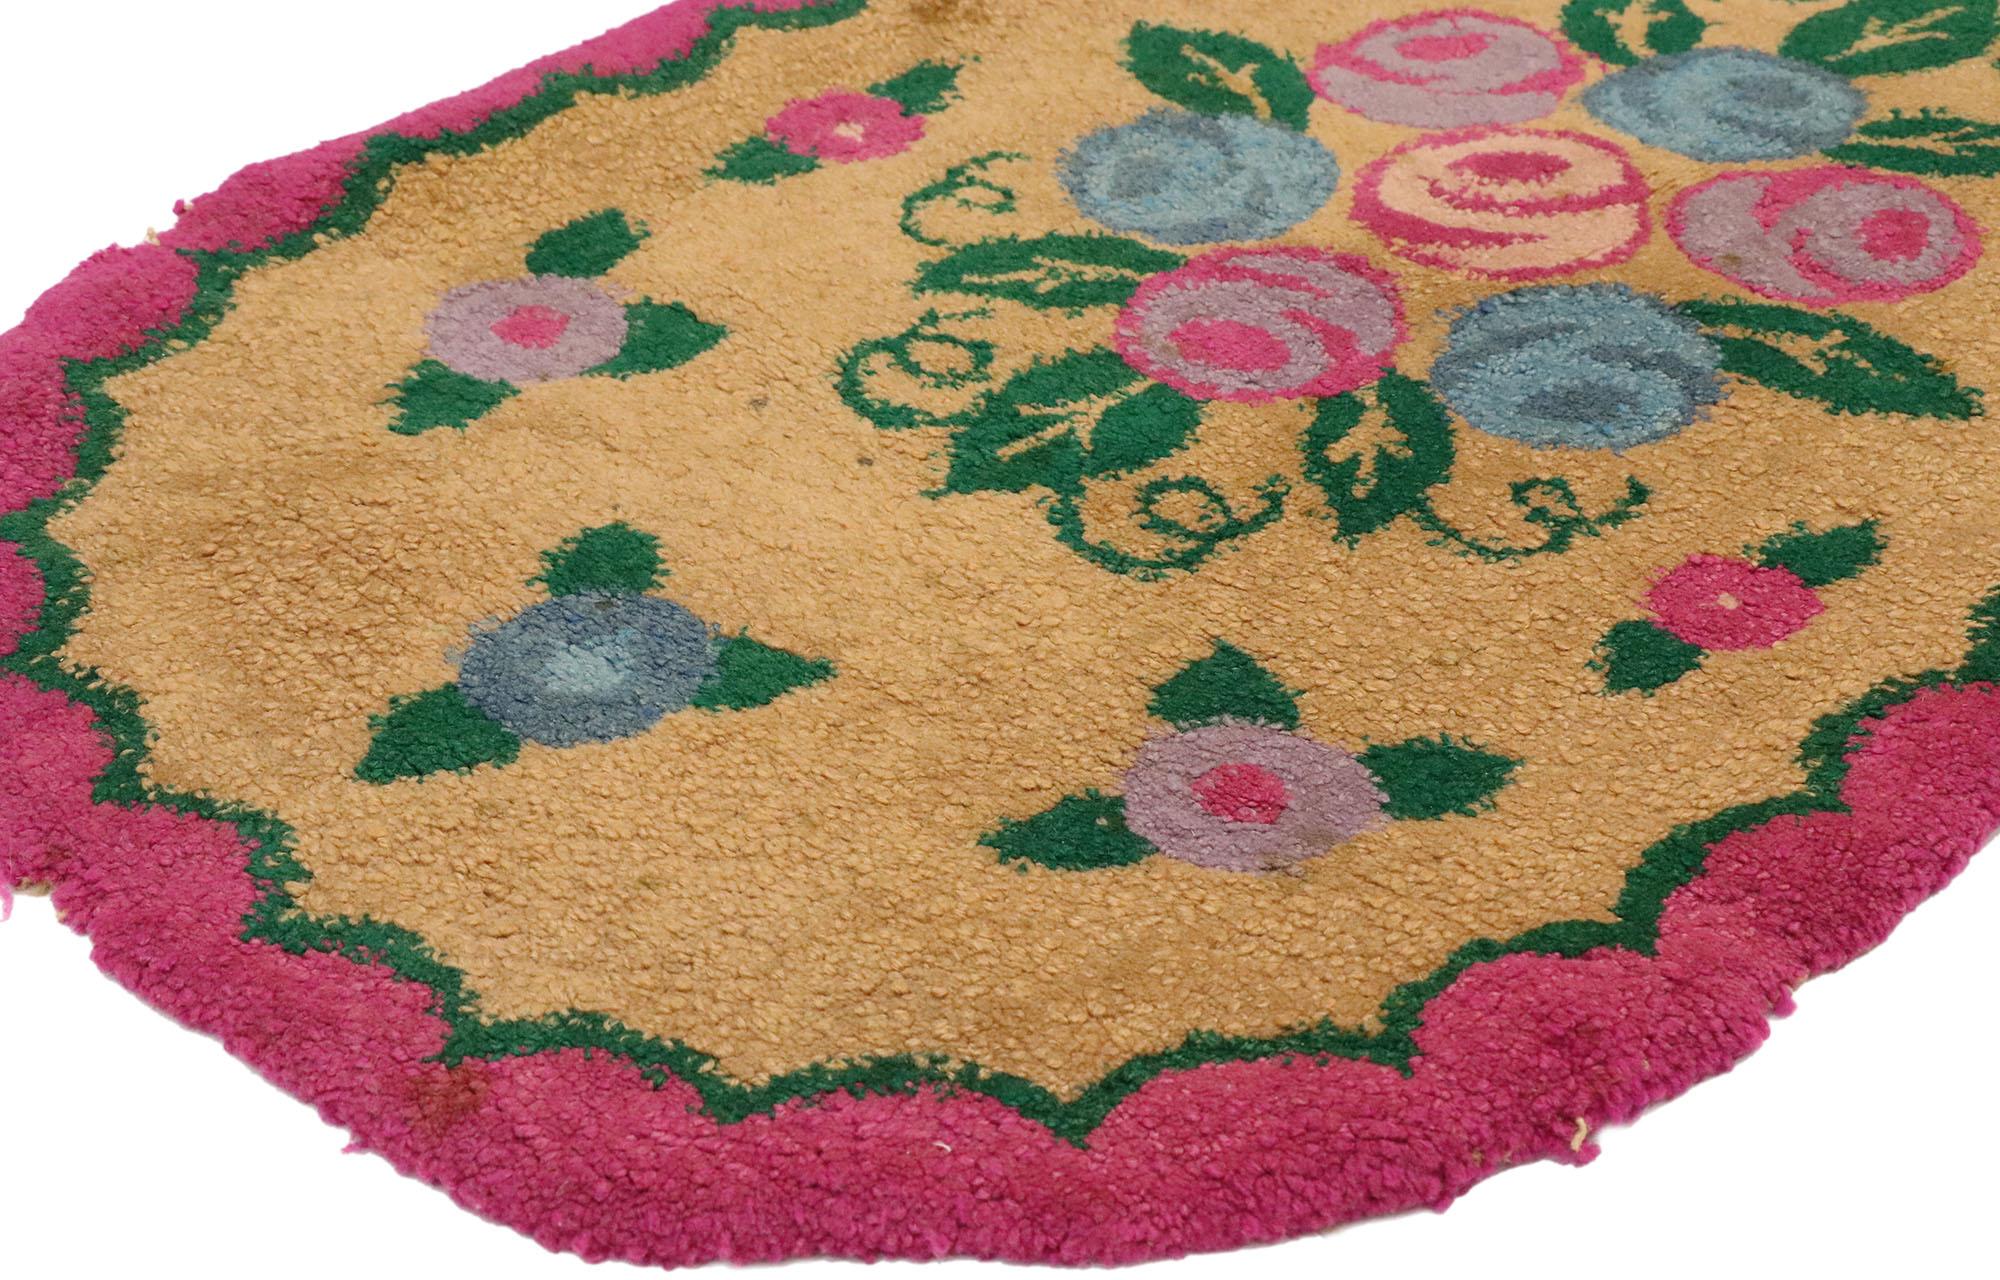 74353, antique American floral hooked oval rug with English country Chintz style 01'11 X 03'06. Drawing inspiration from Mario Buatta, Chintz style and design elements from the 18th century in France, this antique American floral hooked rug with